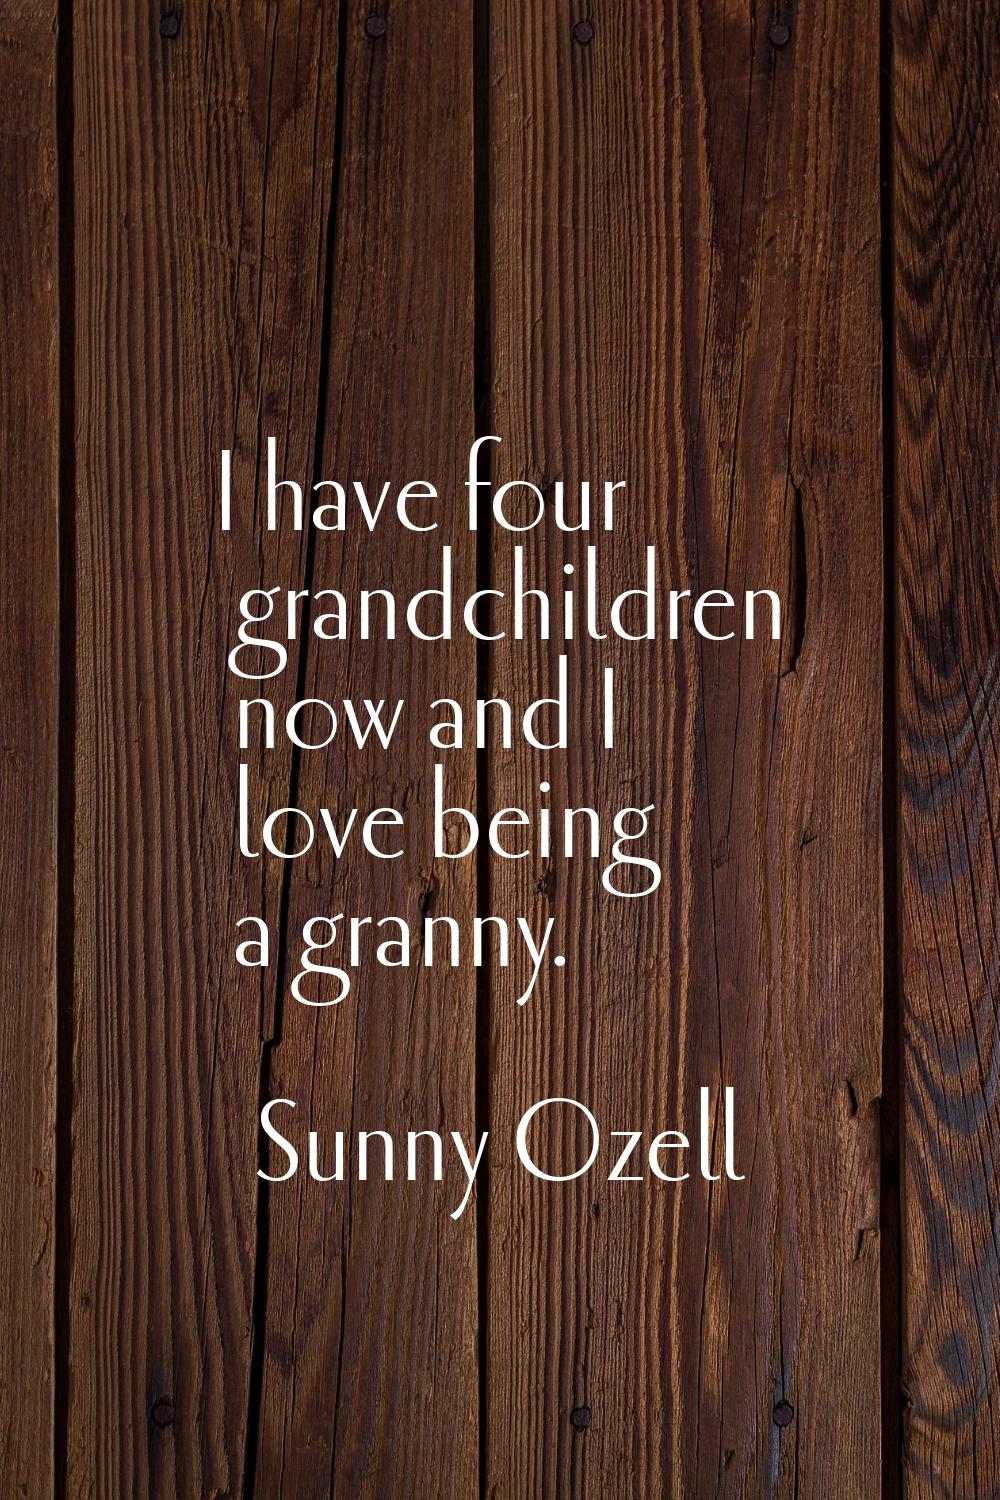 I have four grandchildren now and I love being a granny.